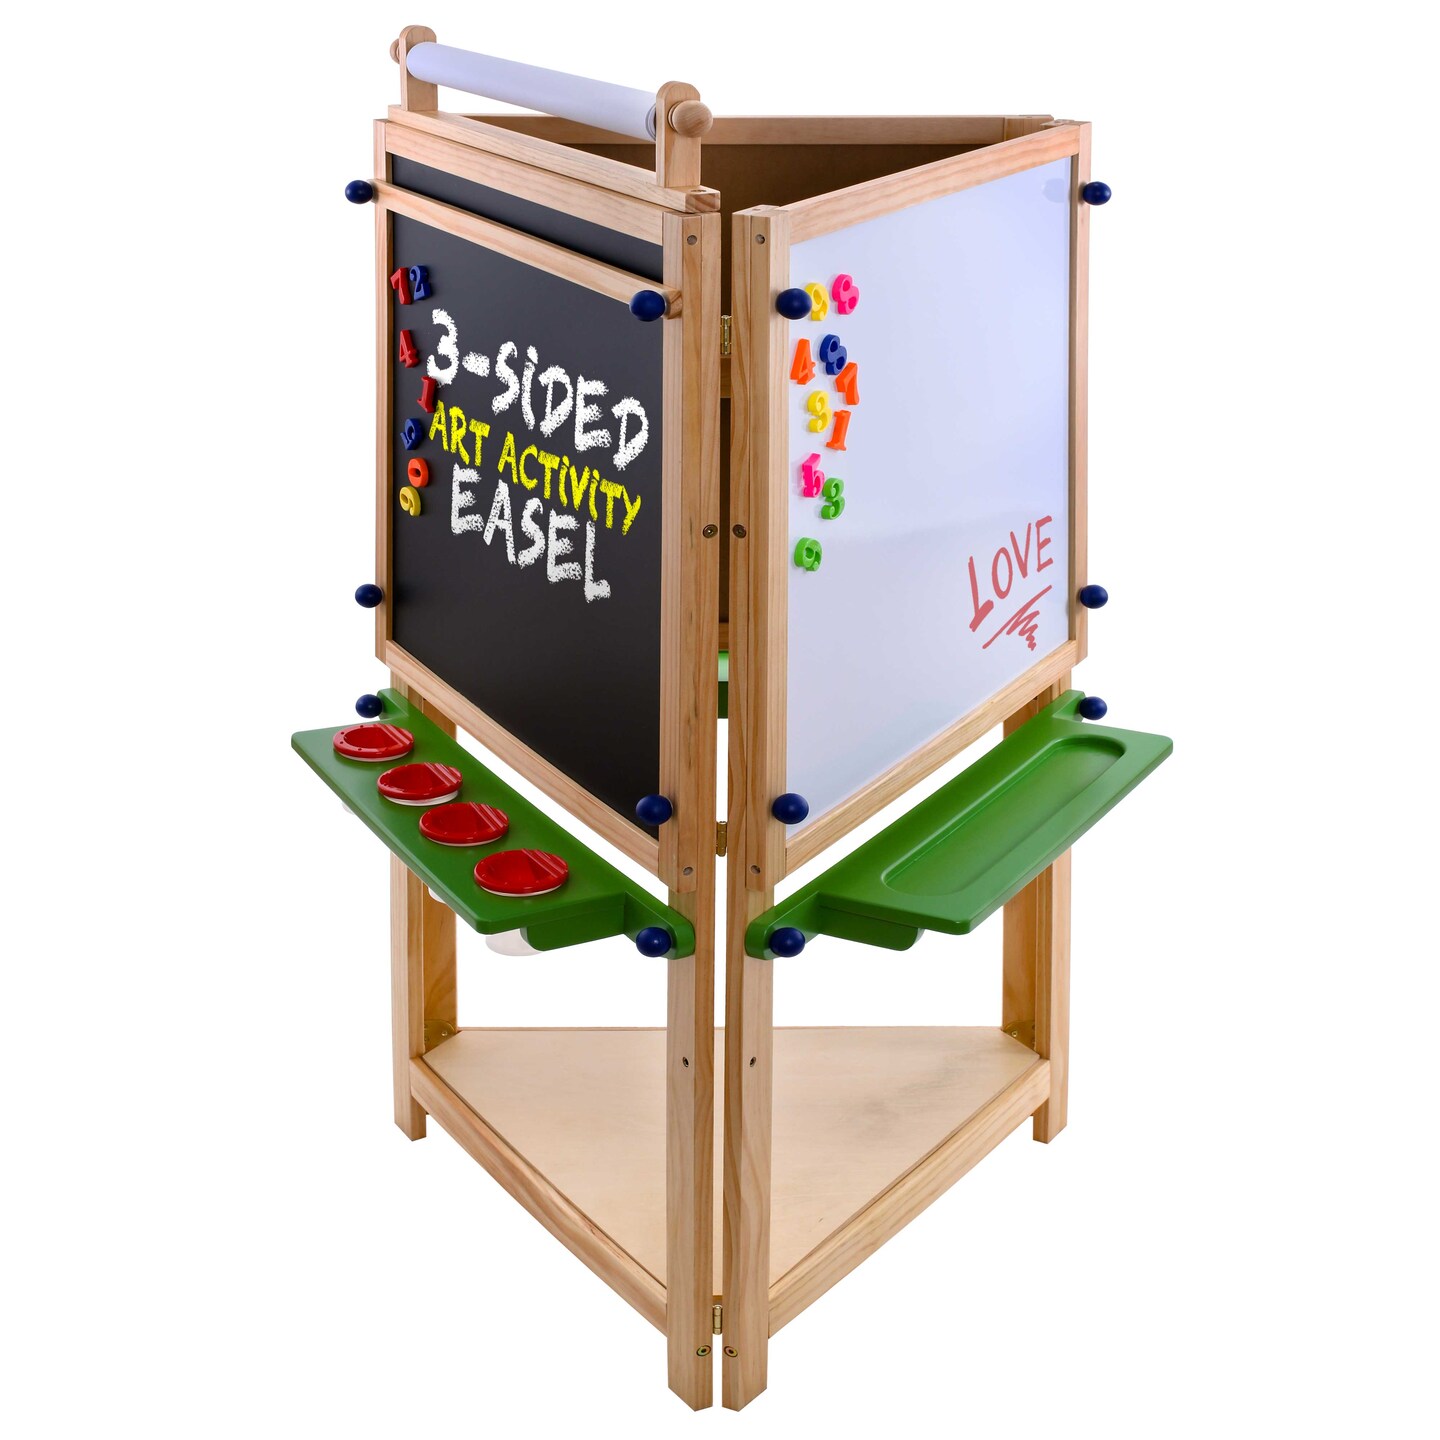 Children&#x27;s 3-Sided Art Activity Easel with 3 Magnetic Stations, Chalkboard, Blackboard, Dry Erase White Board, Paper Roll, Paint Cups Shelf - Painting